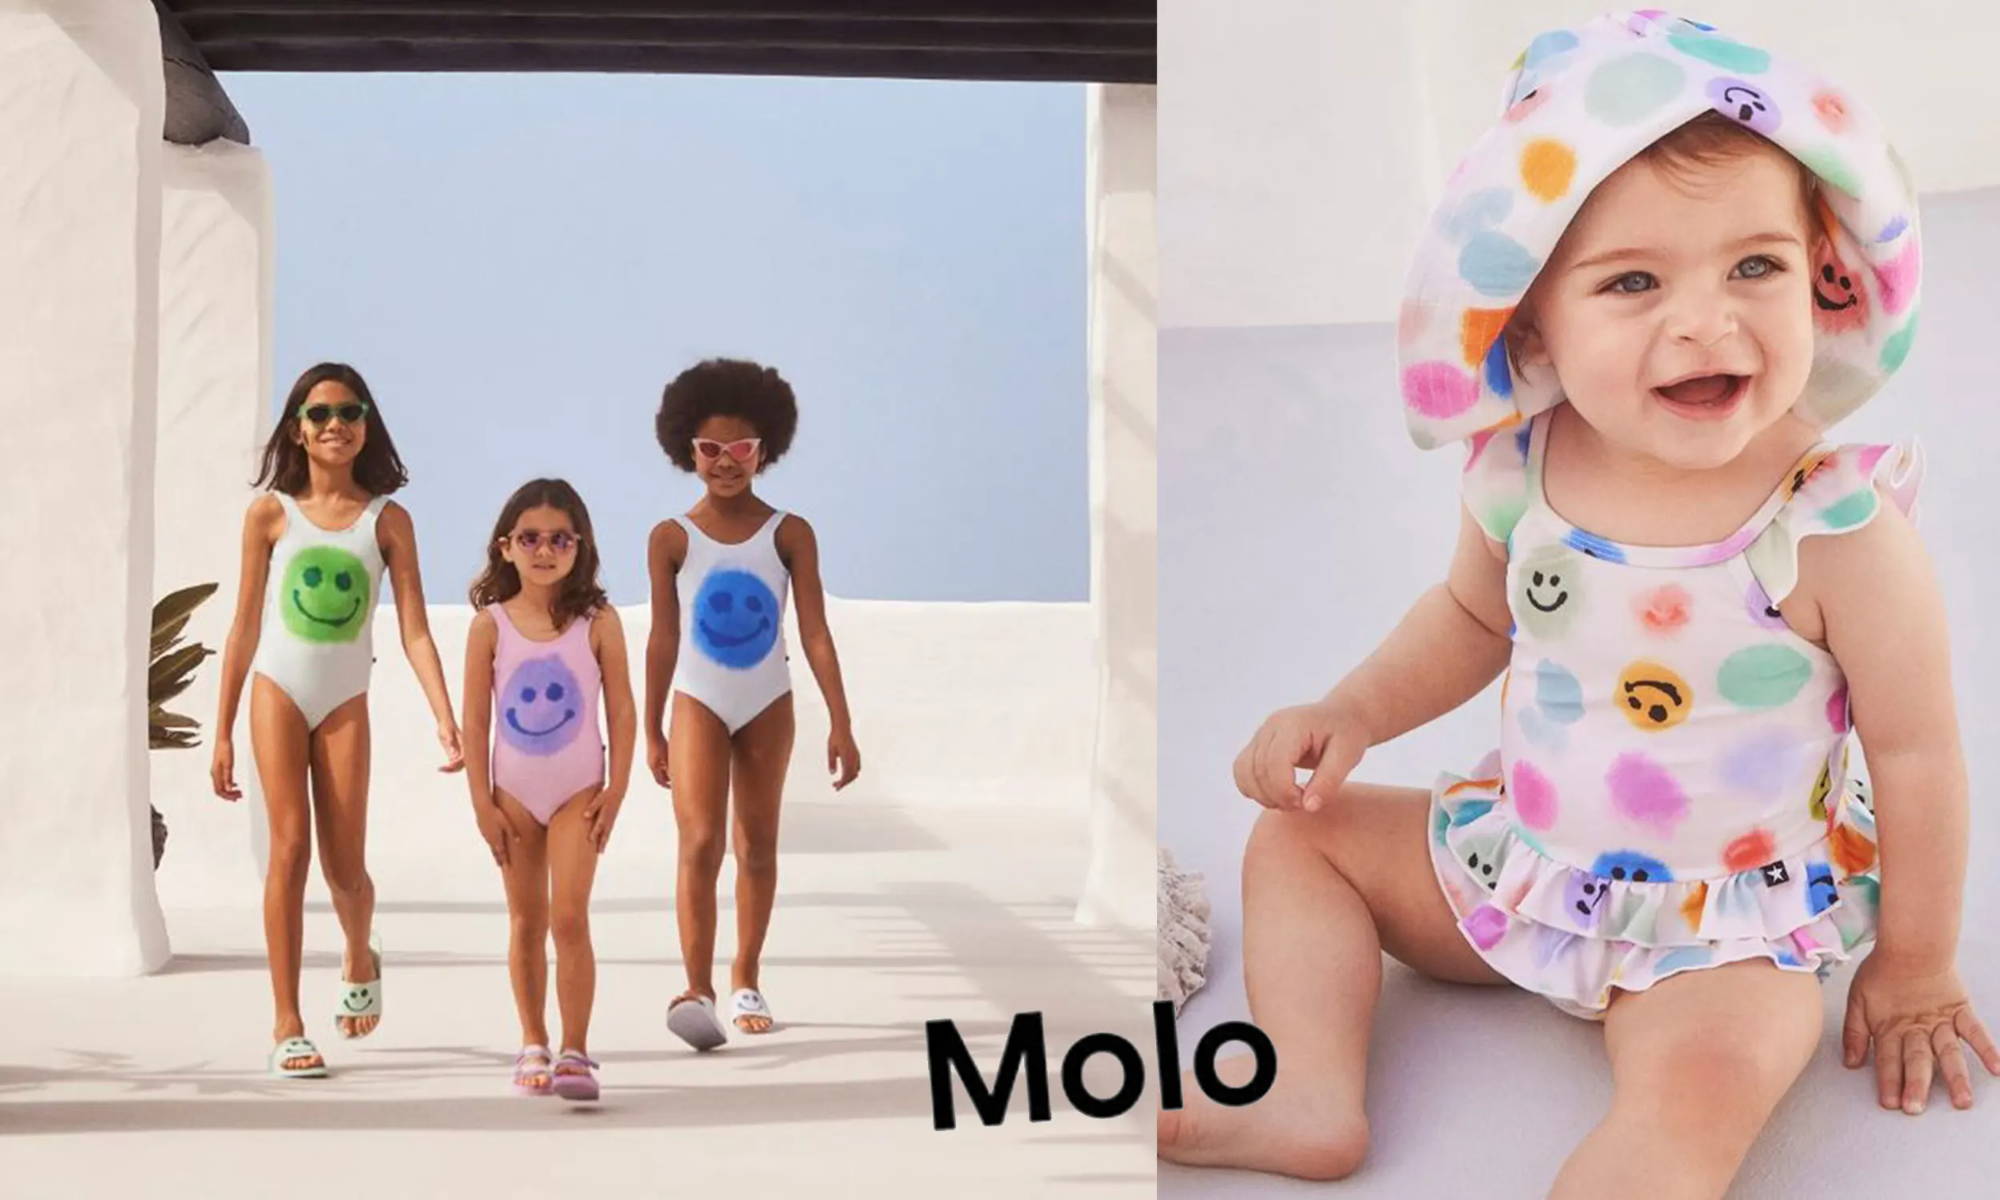 Image of children in Molo bathing suits